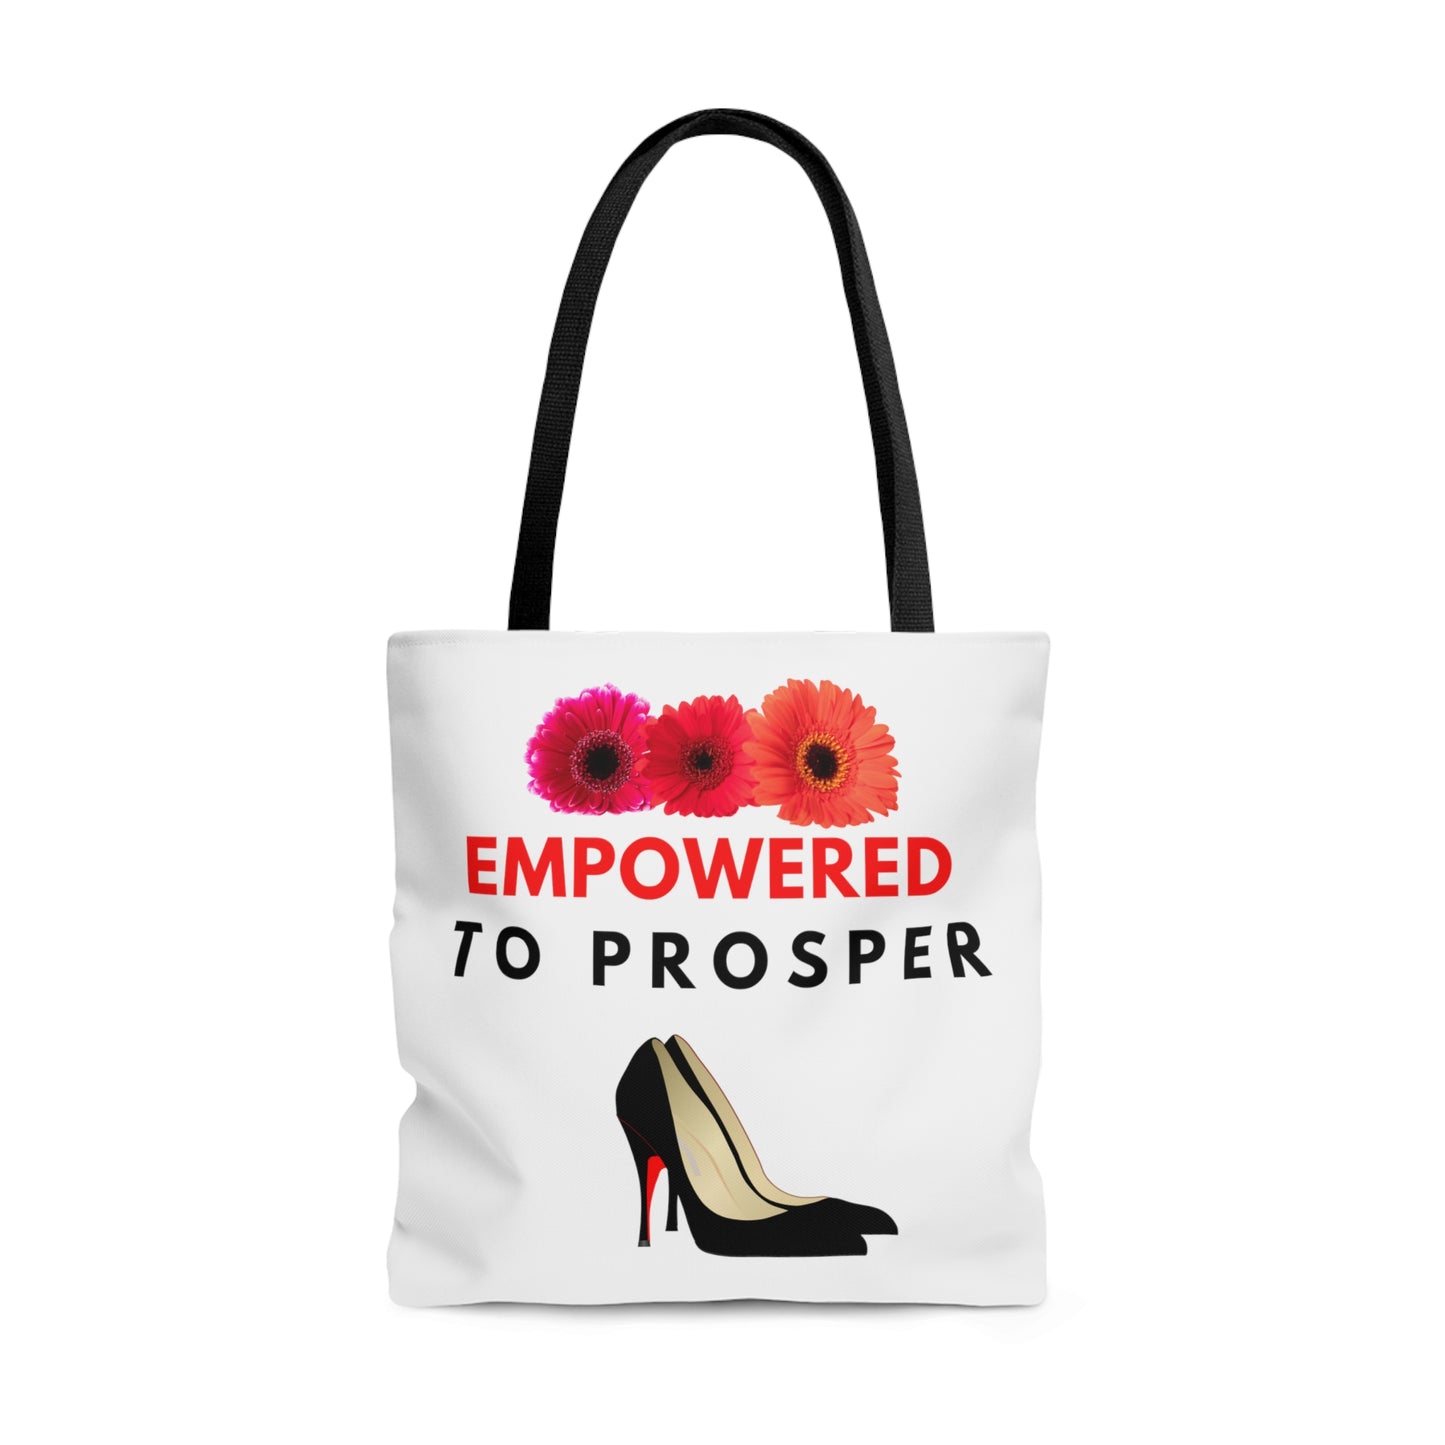 Empowered to Prosper Tote Bag